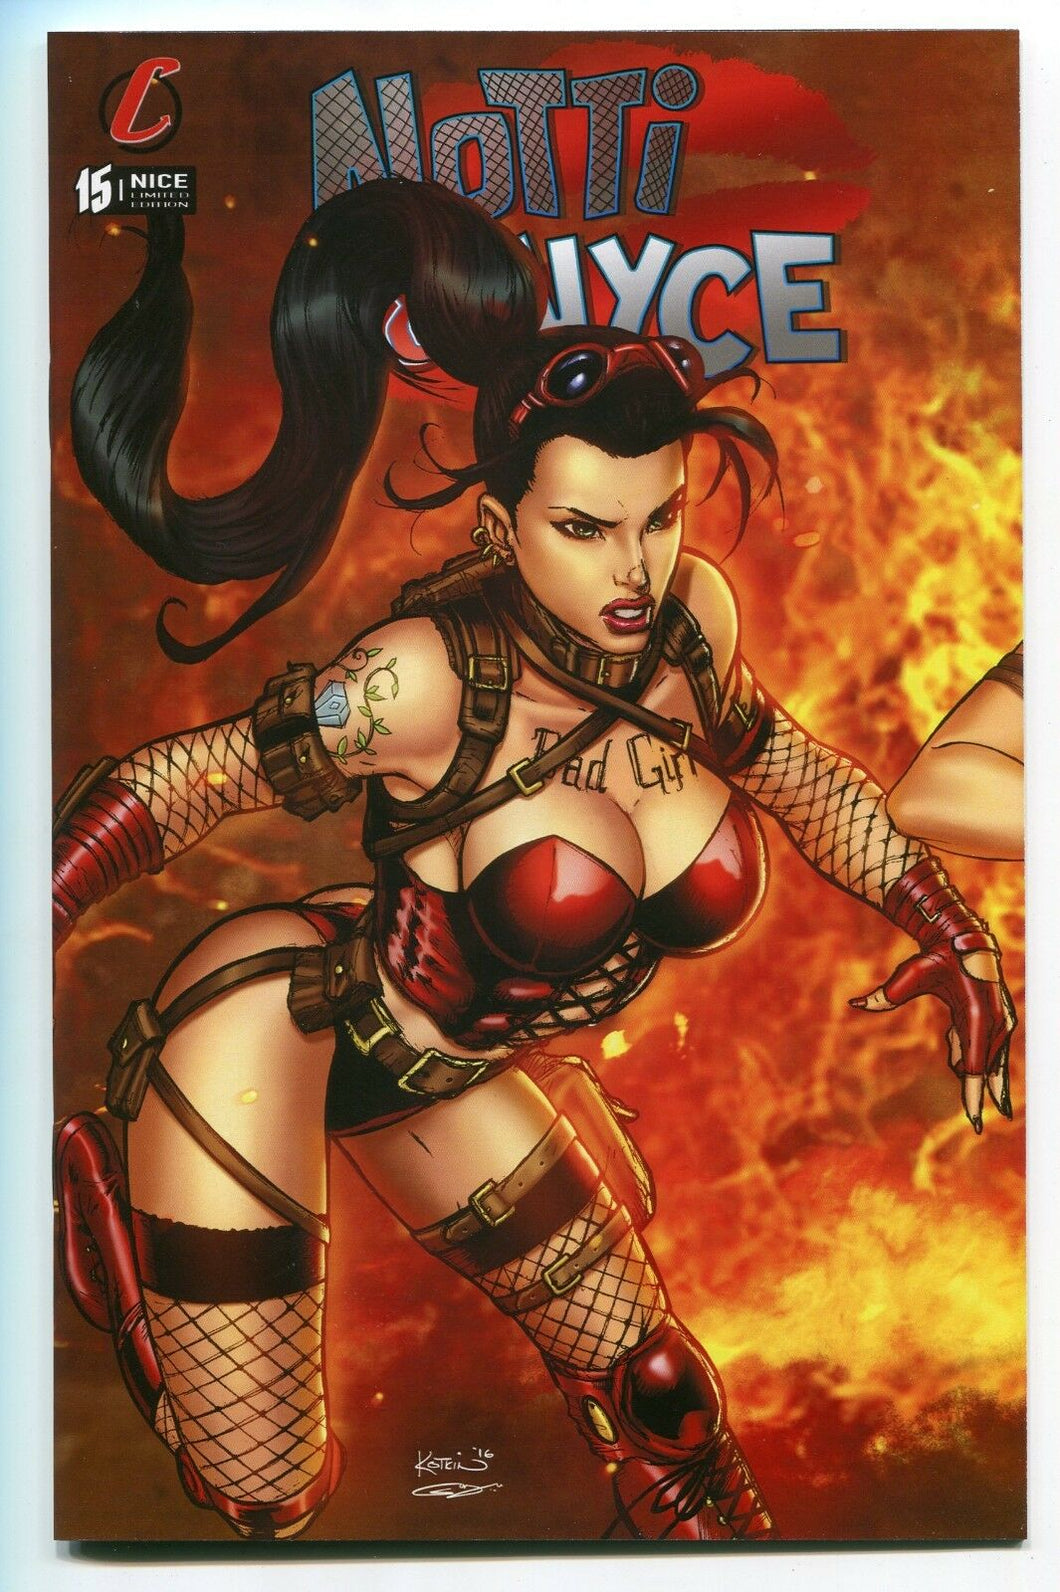 Notti & Nyce #15 A NICE Variant Cover by Alex Kotkin Counterpoint Entertainment